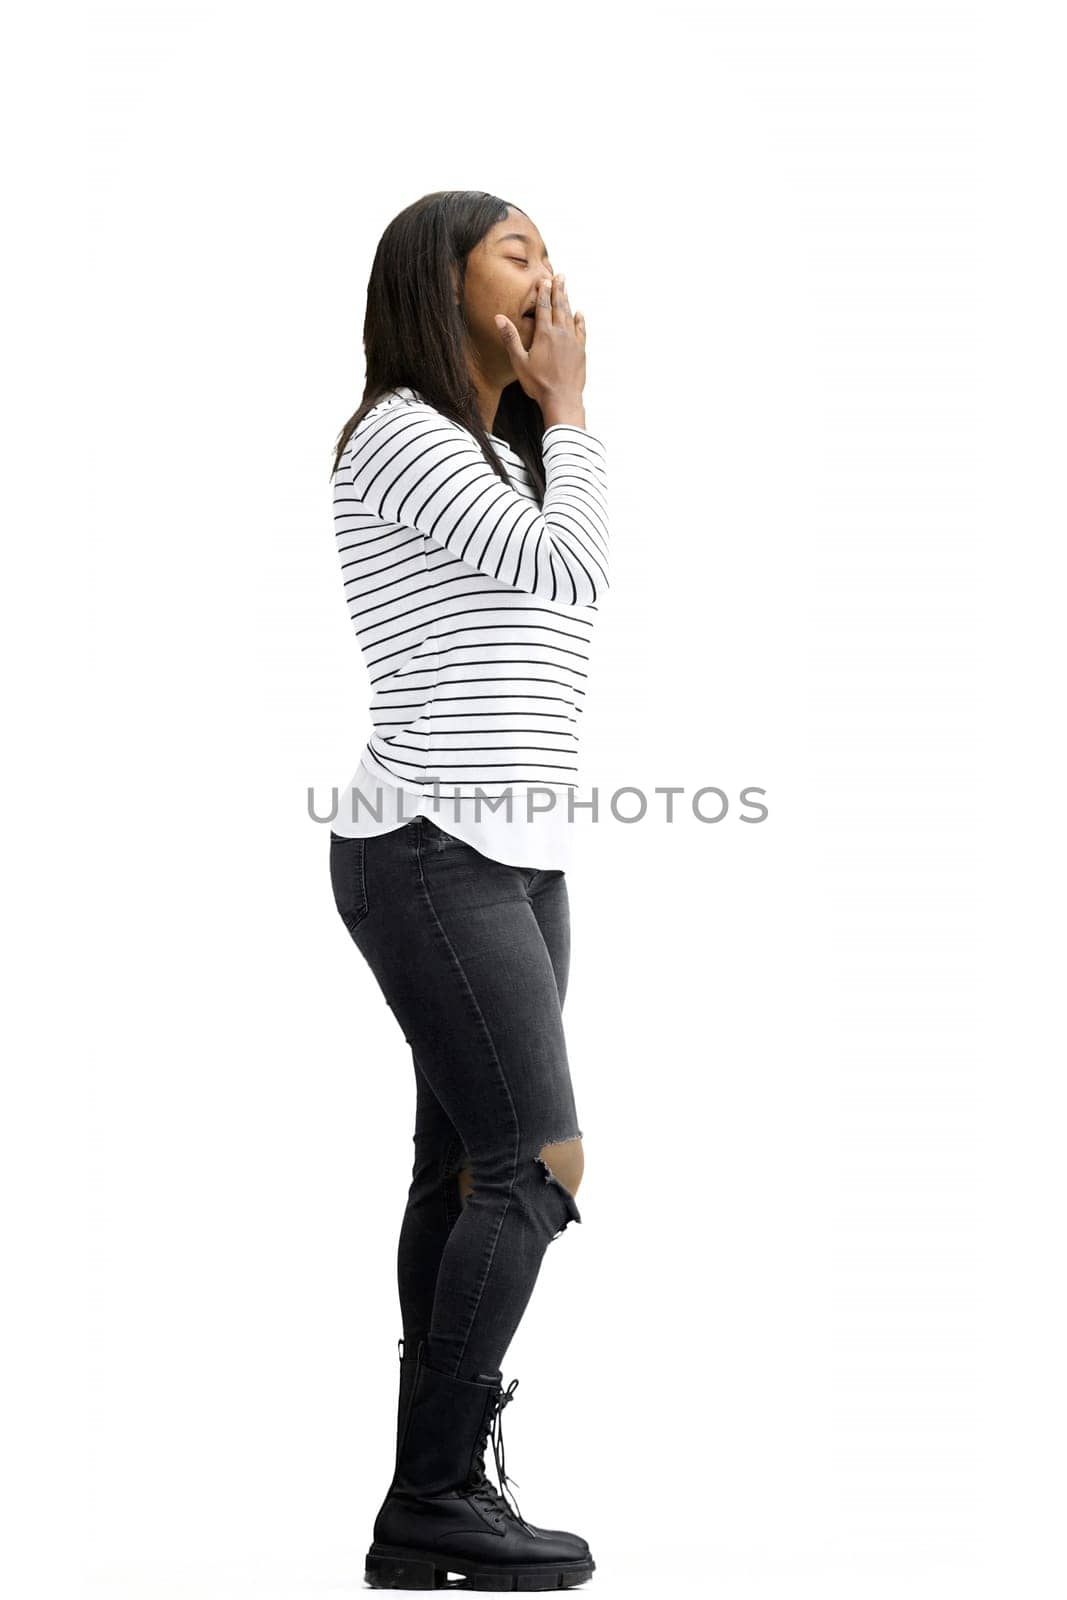 A woman, on a white background, in full height, yawns.